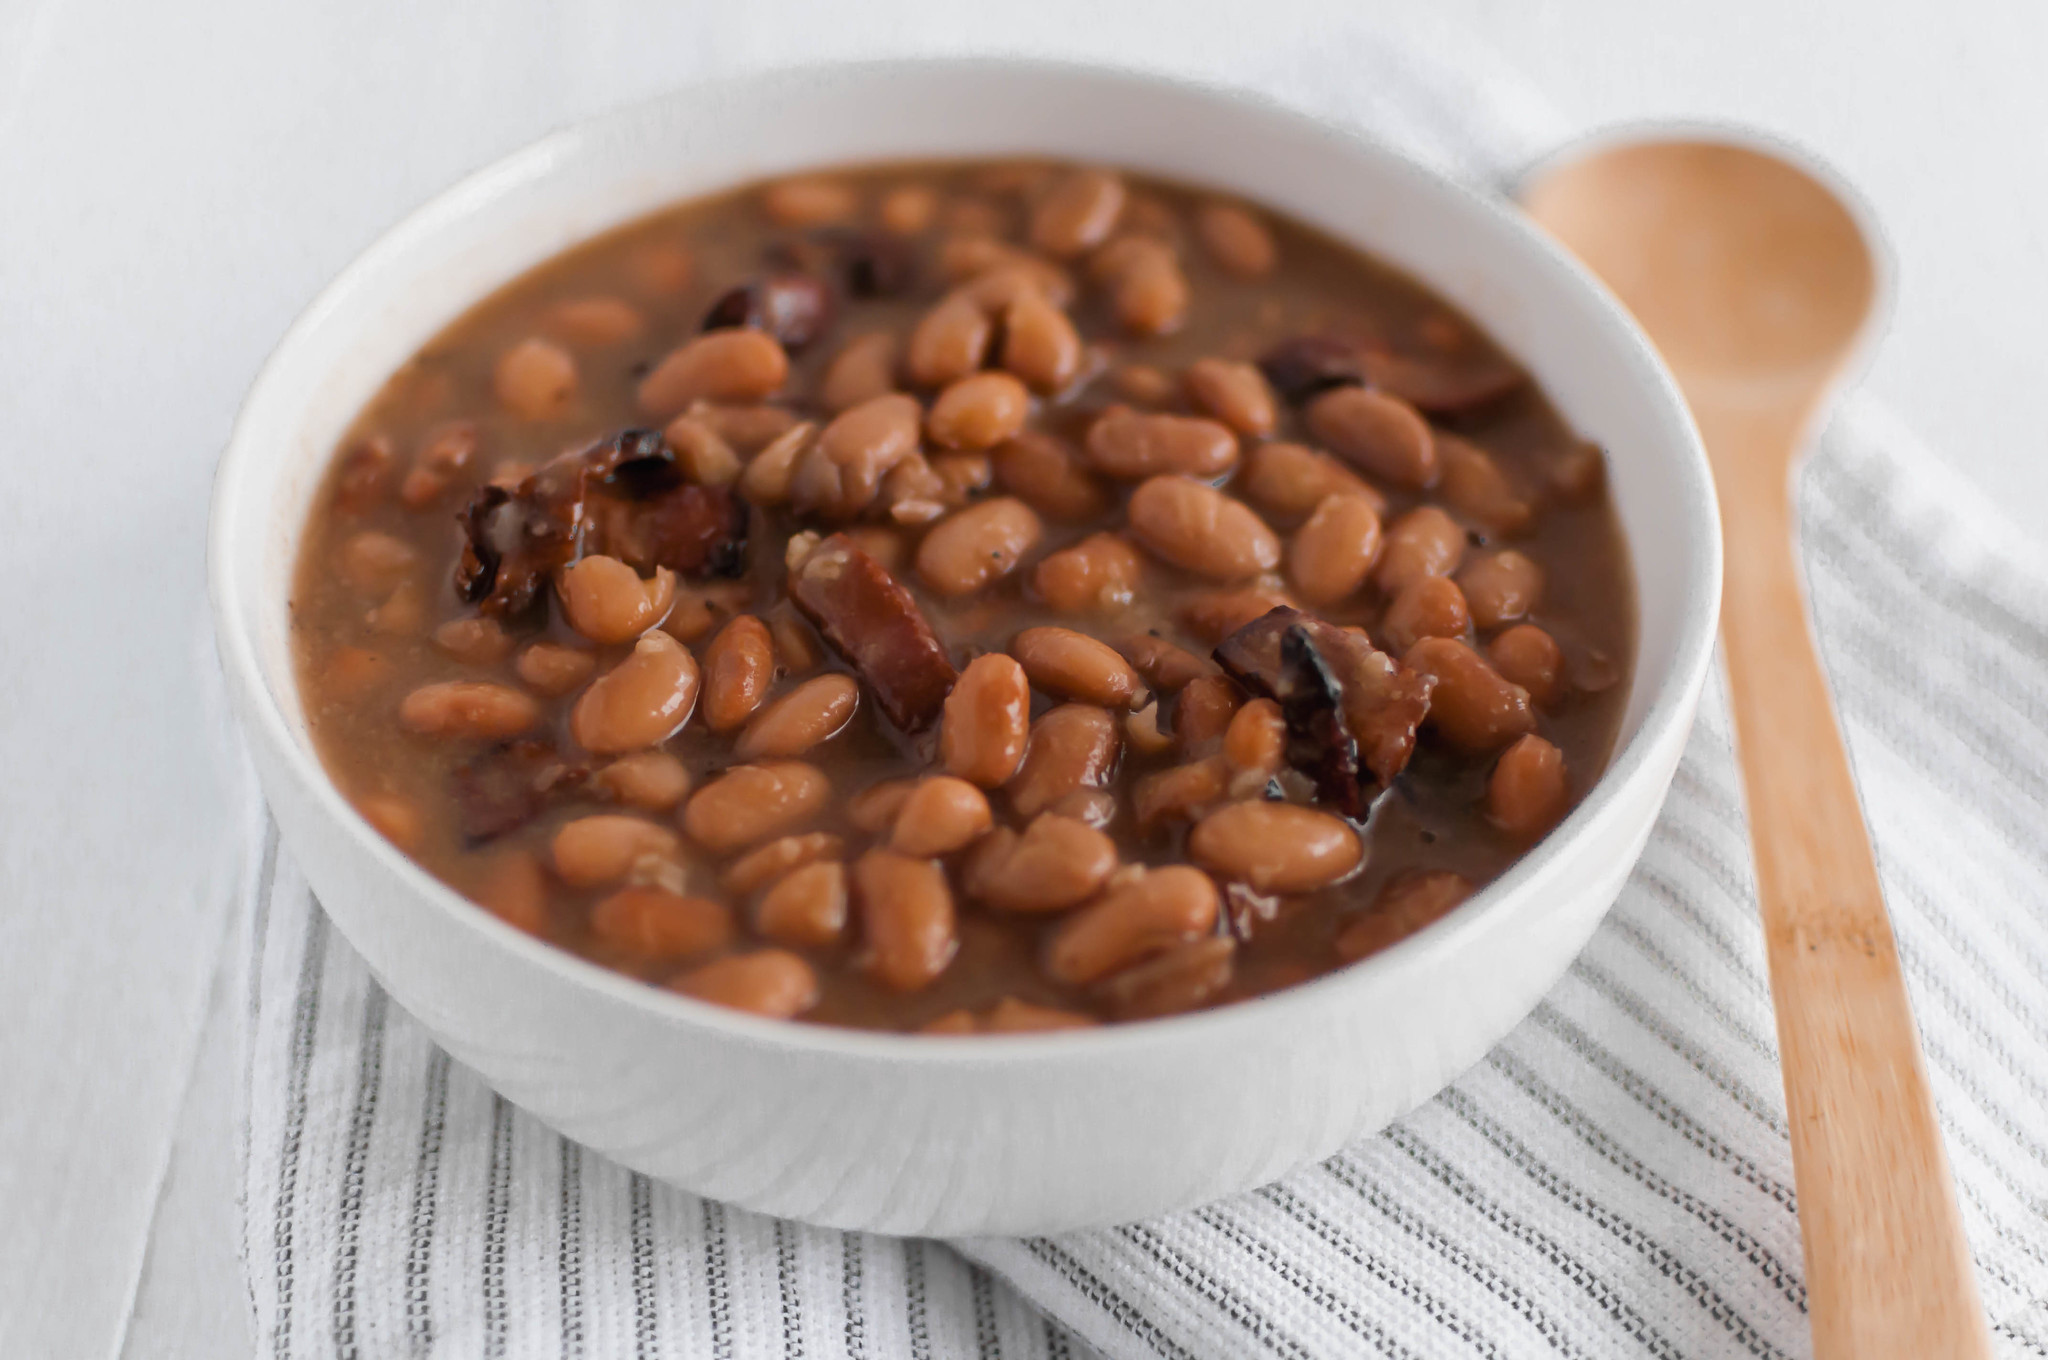 If you love Chipotle's pinto beans, look no further because now you can make them at home. Dried pinto beans cook all day in the slow cooker with bacon, onion and garlic to make these flavorful Bacon Pinto Beans. Perfect for rice bowls, nacho night or even on their own.